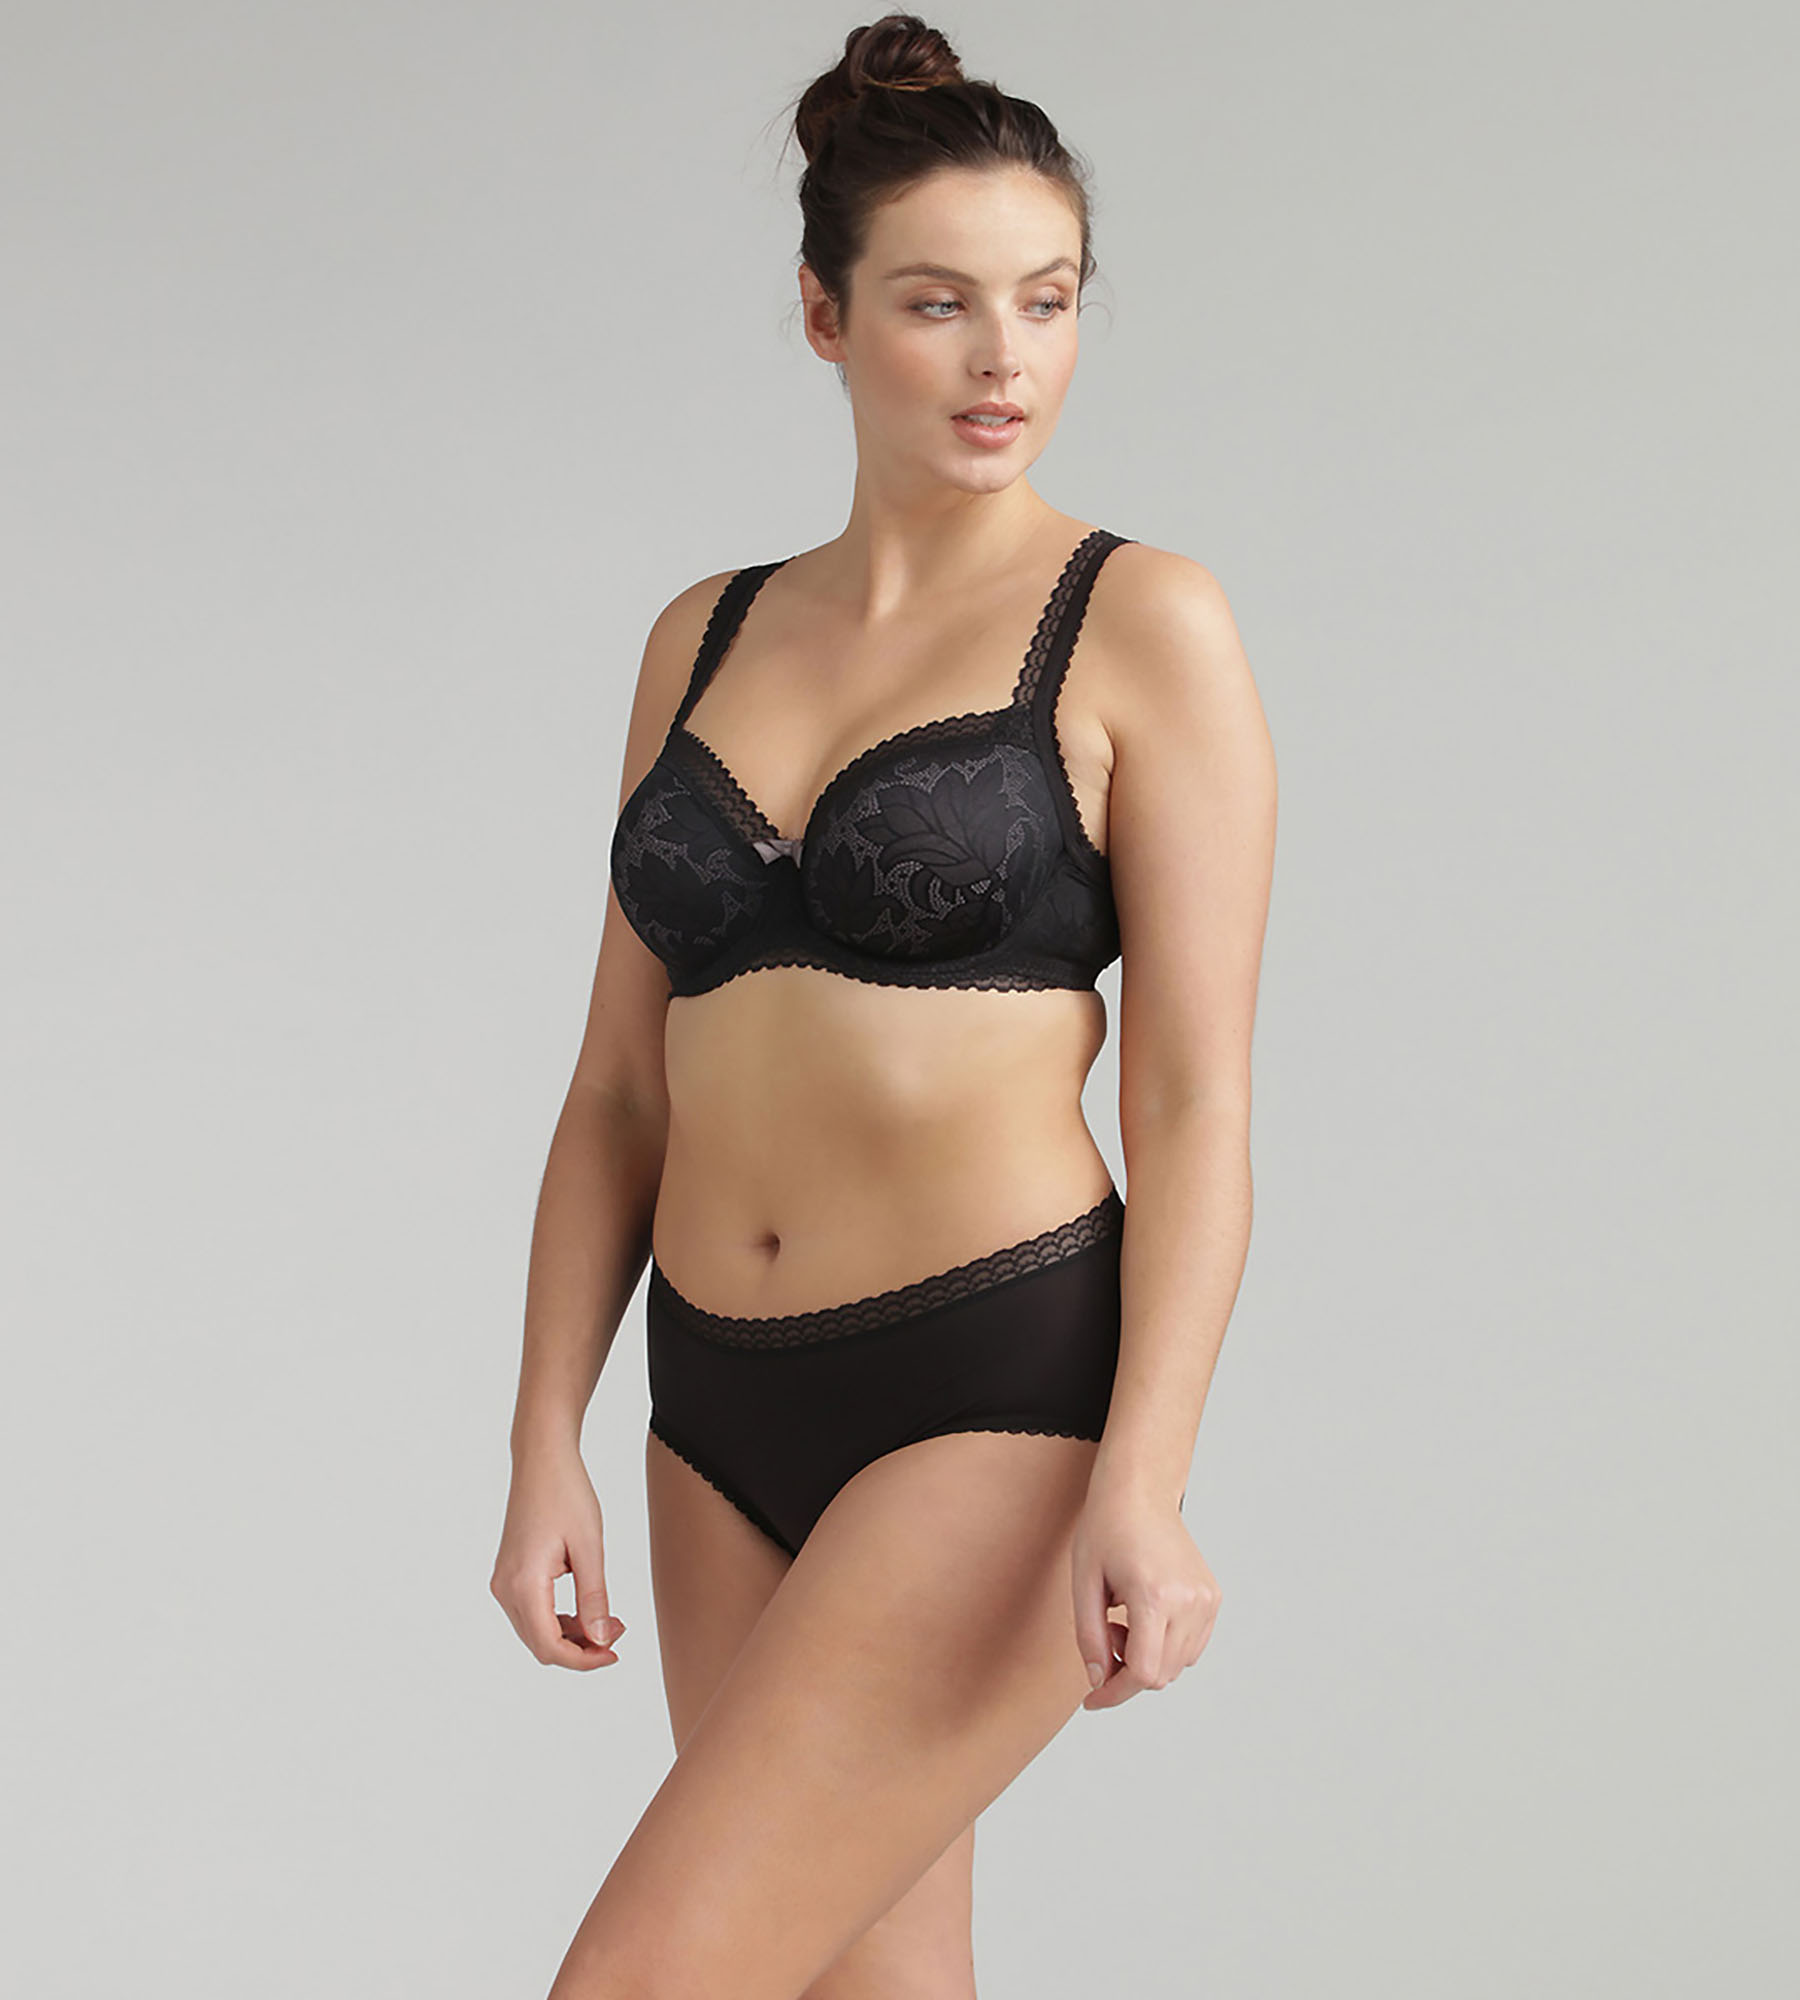 Midi Knickers in Black Lace - Invisible Elegance, , PLAYTEX